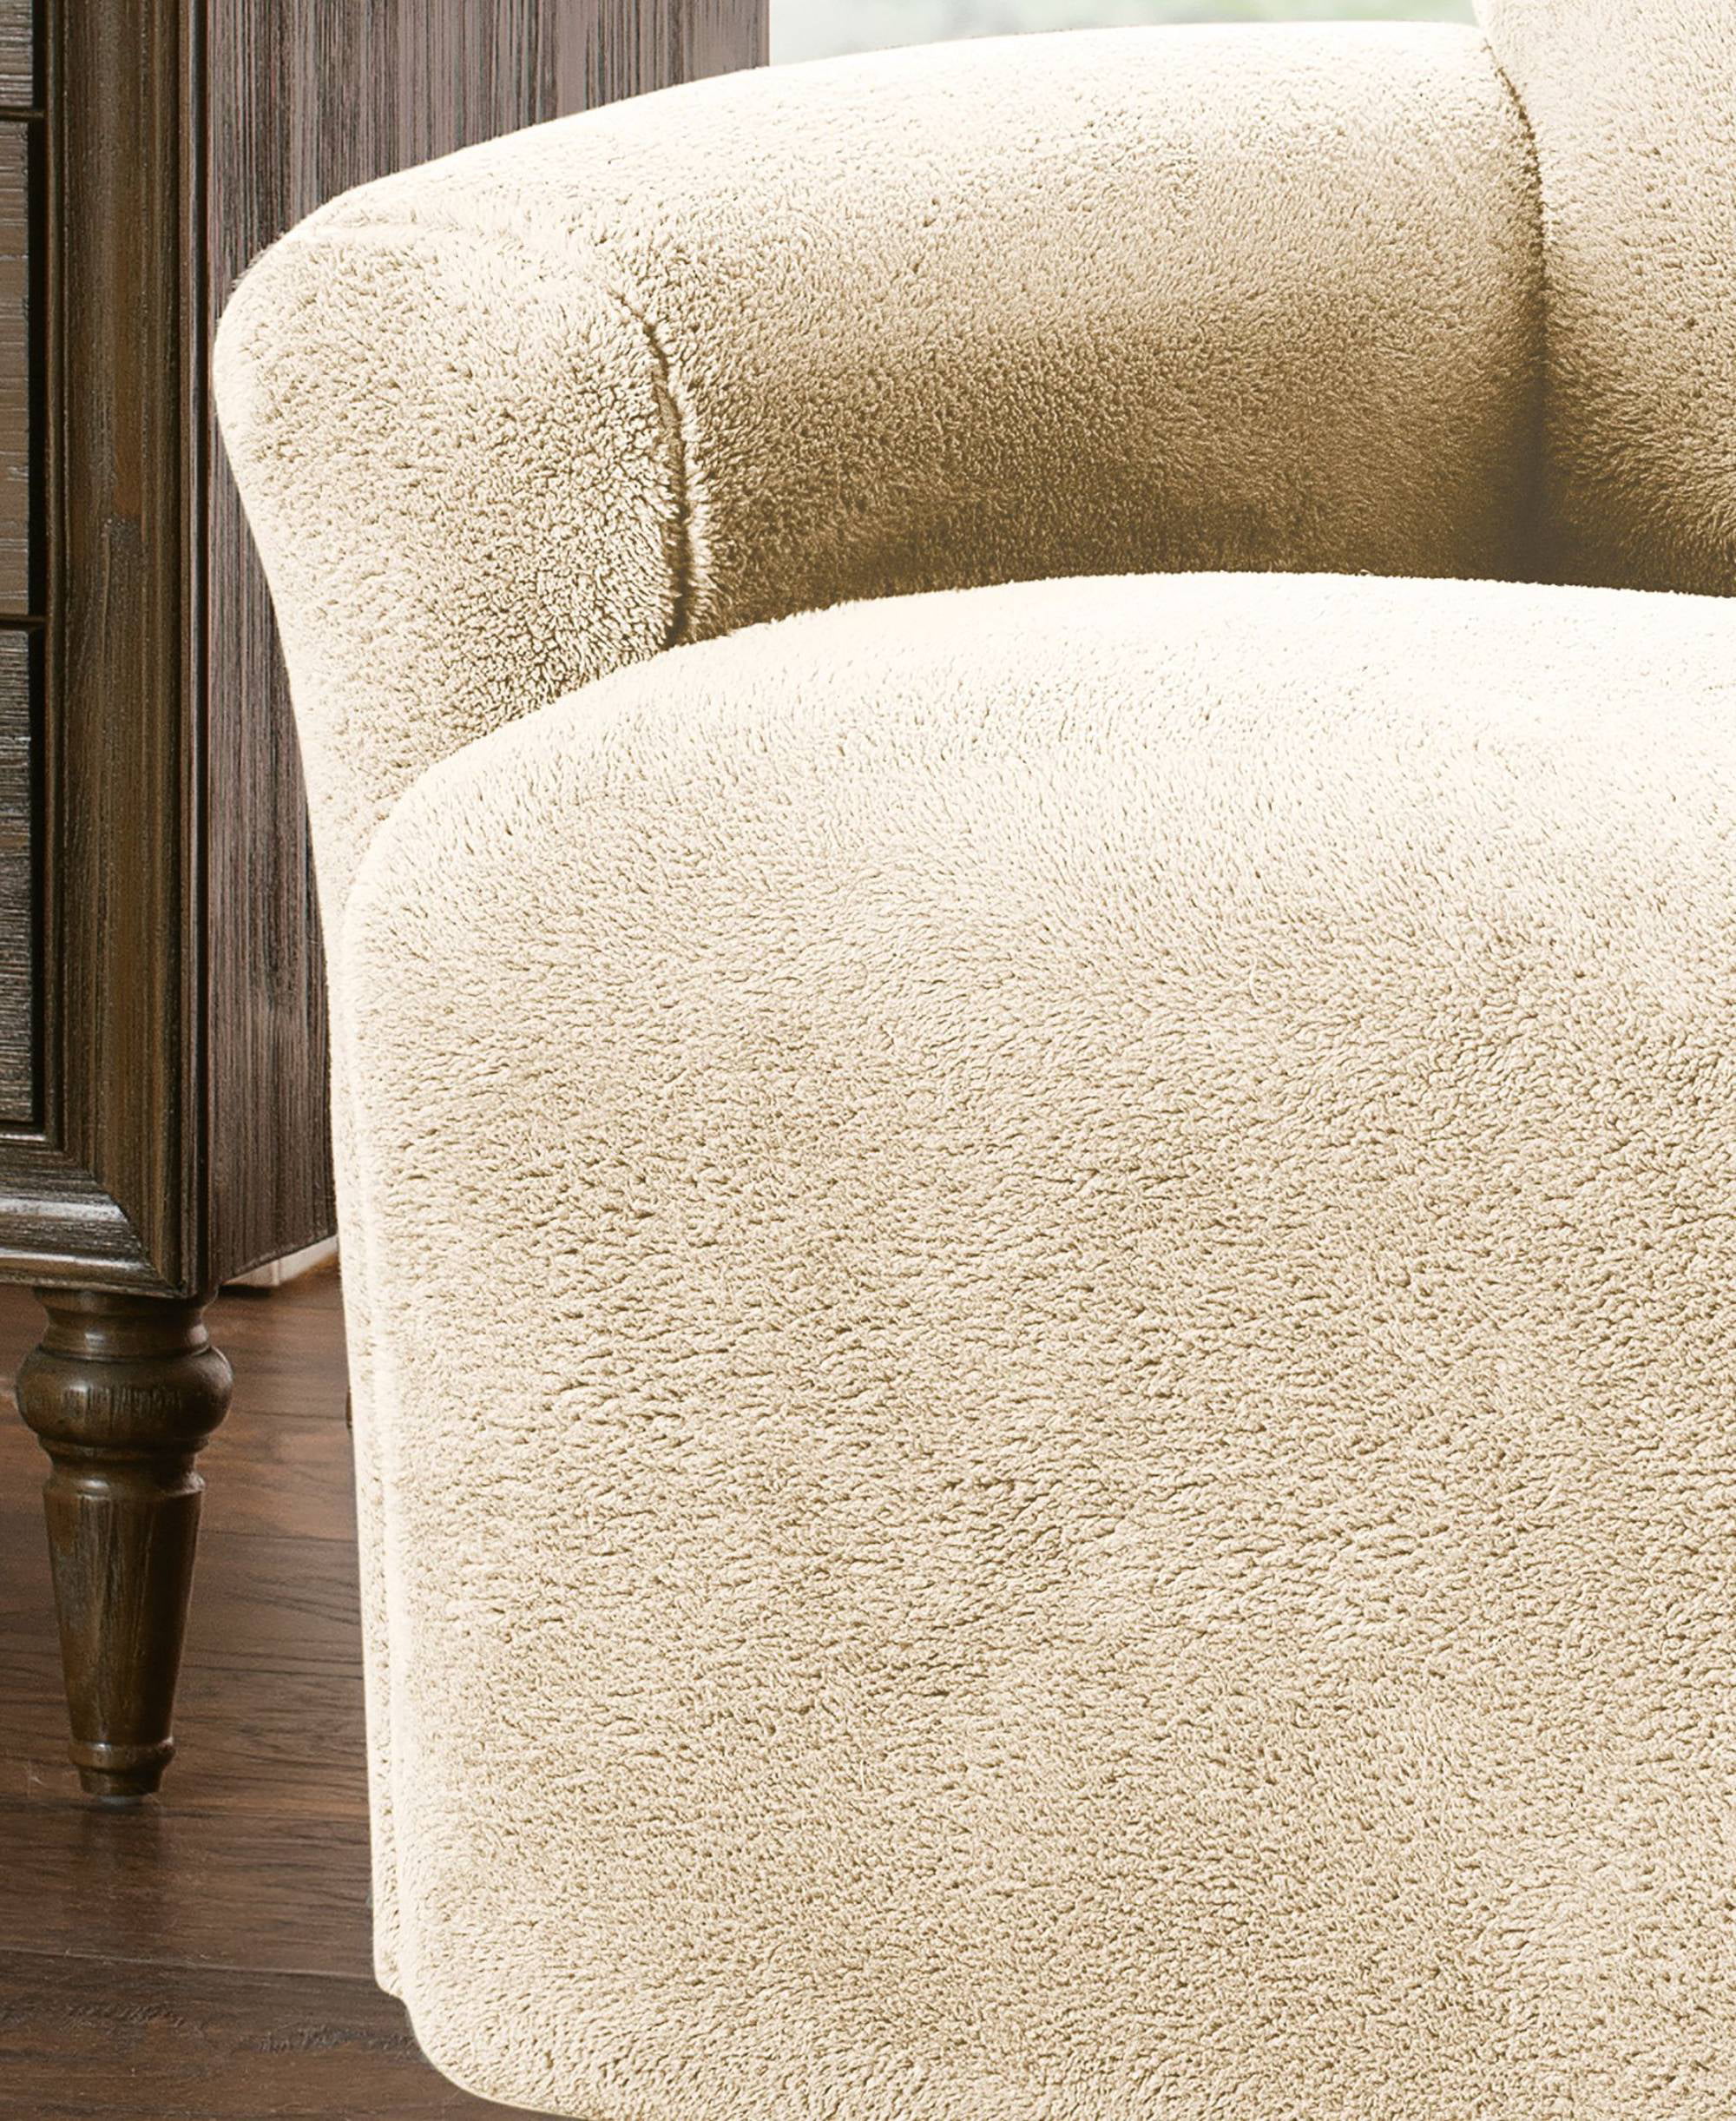 4-Piece Stretch Recliner Chair Slipcover, Sand – Factory Direct